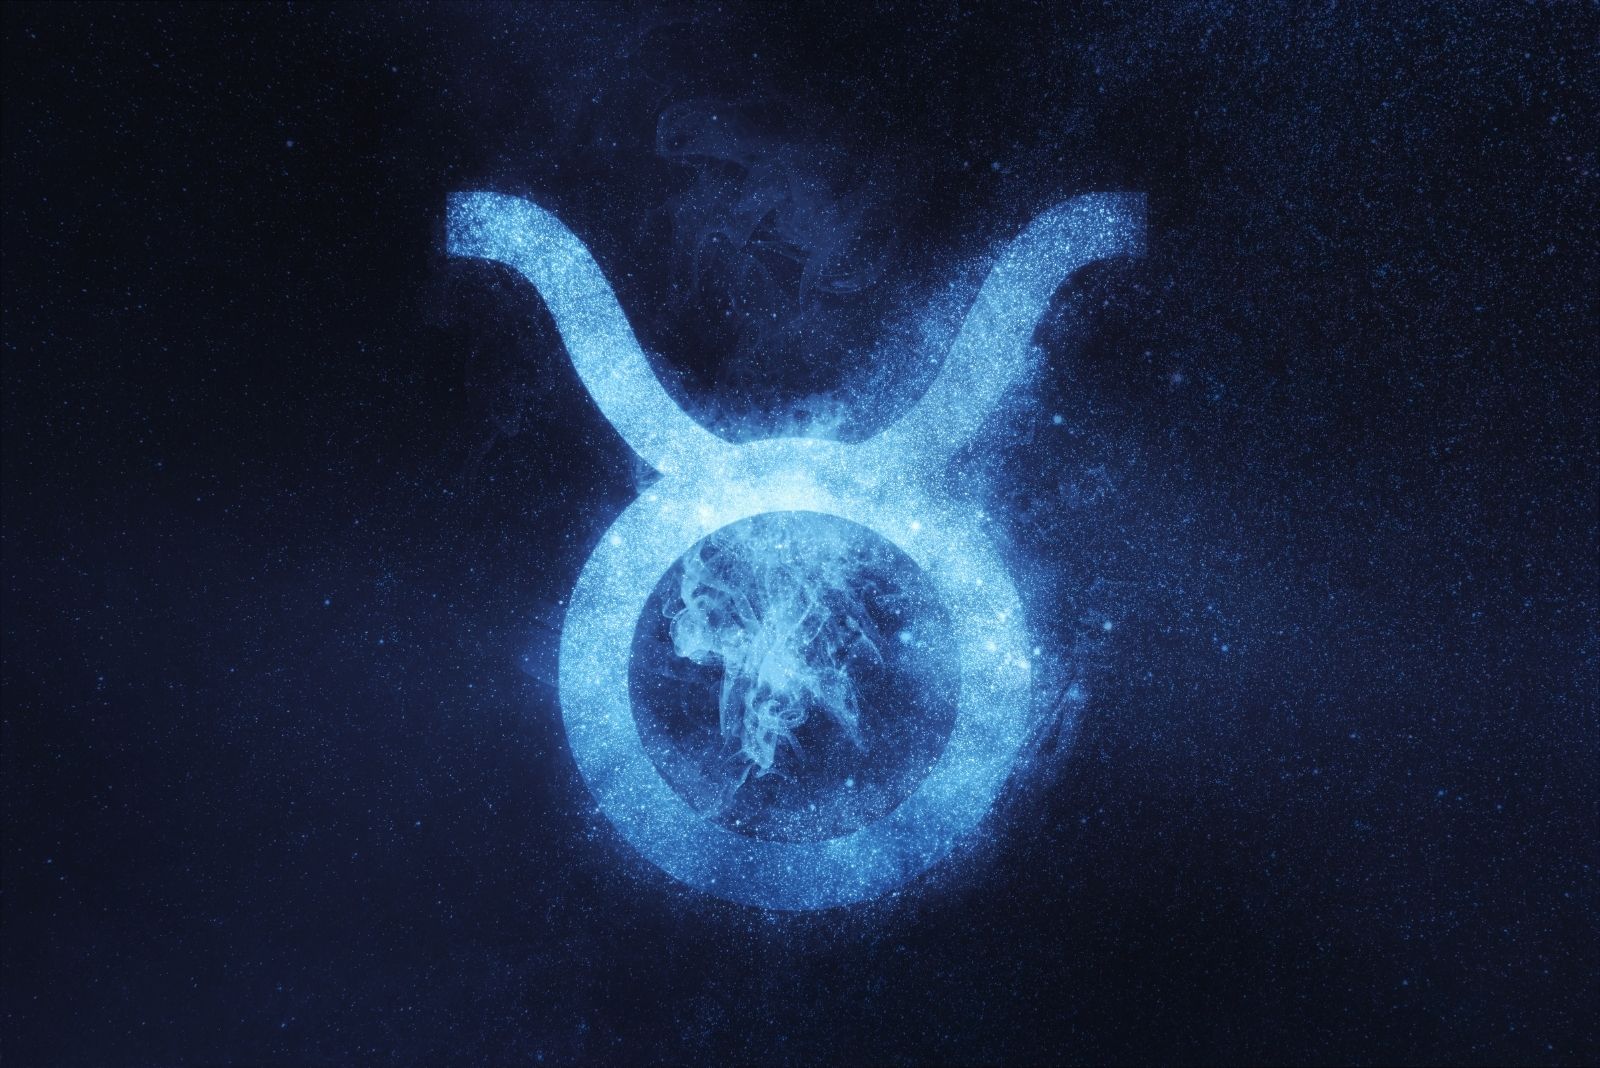 taurus zodiac sign with abstract night sky background